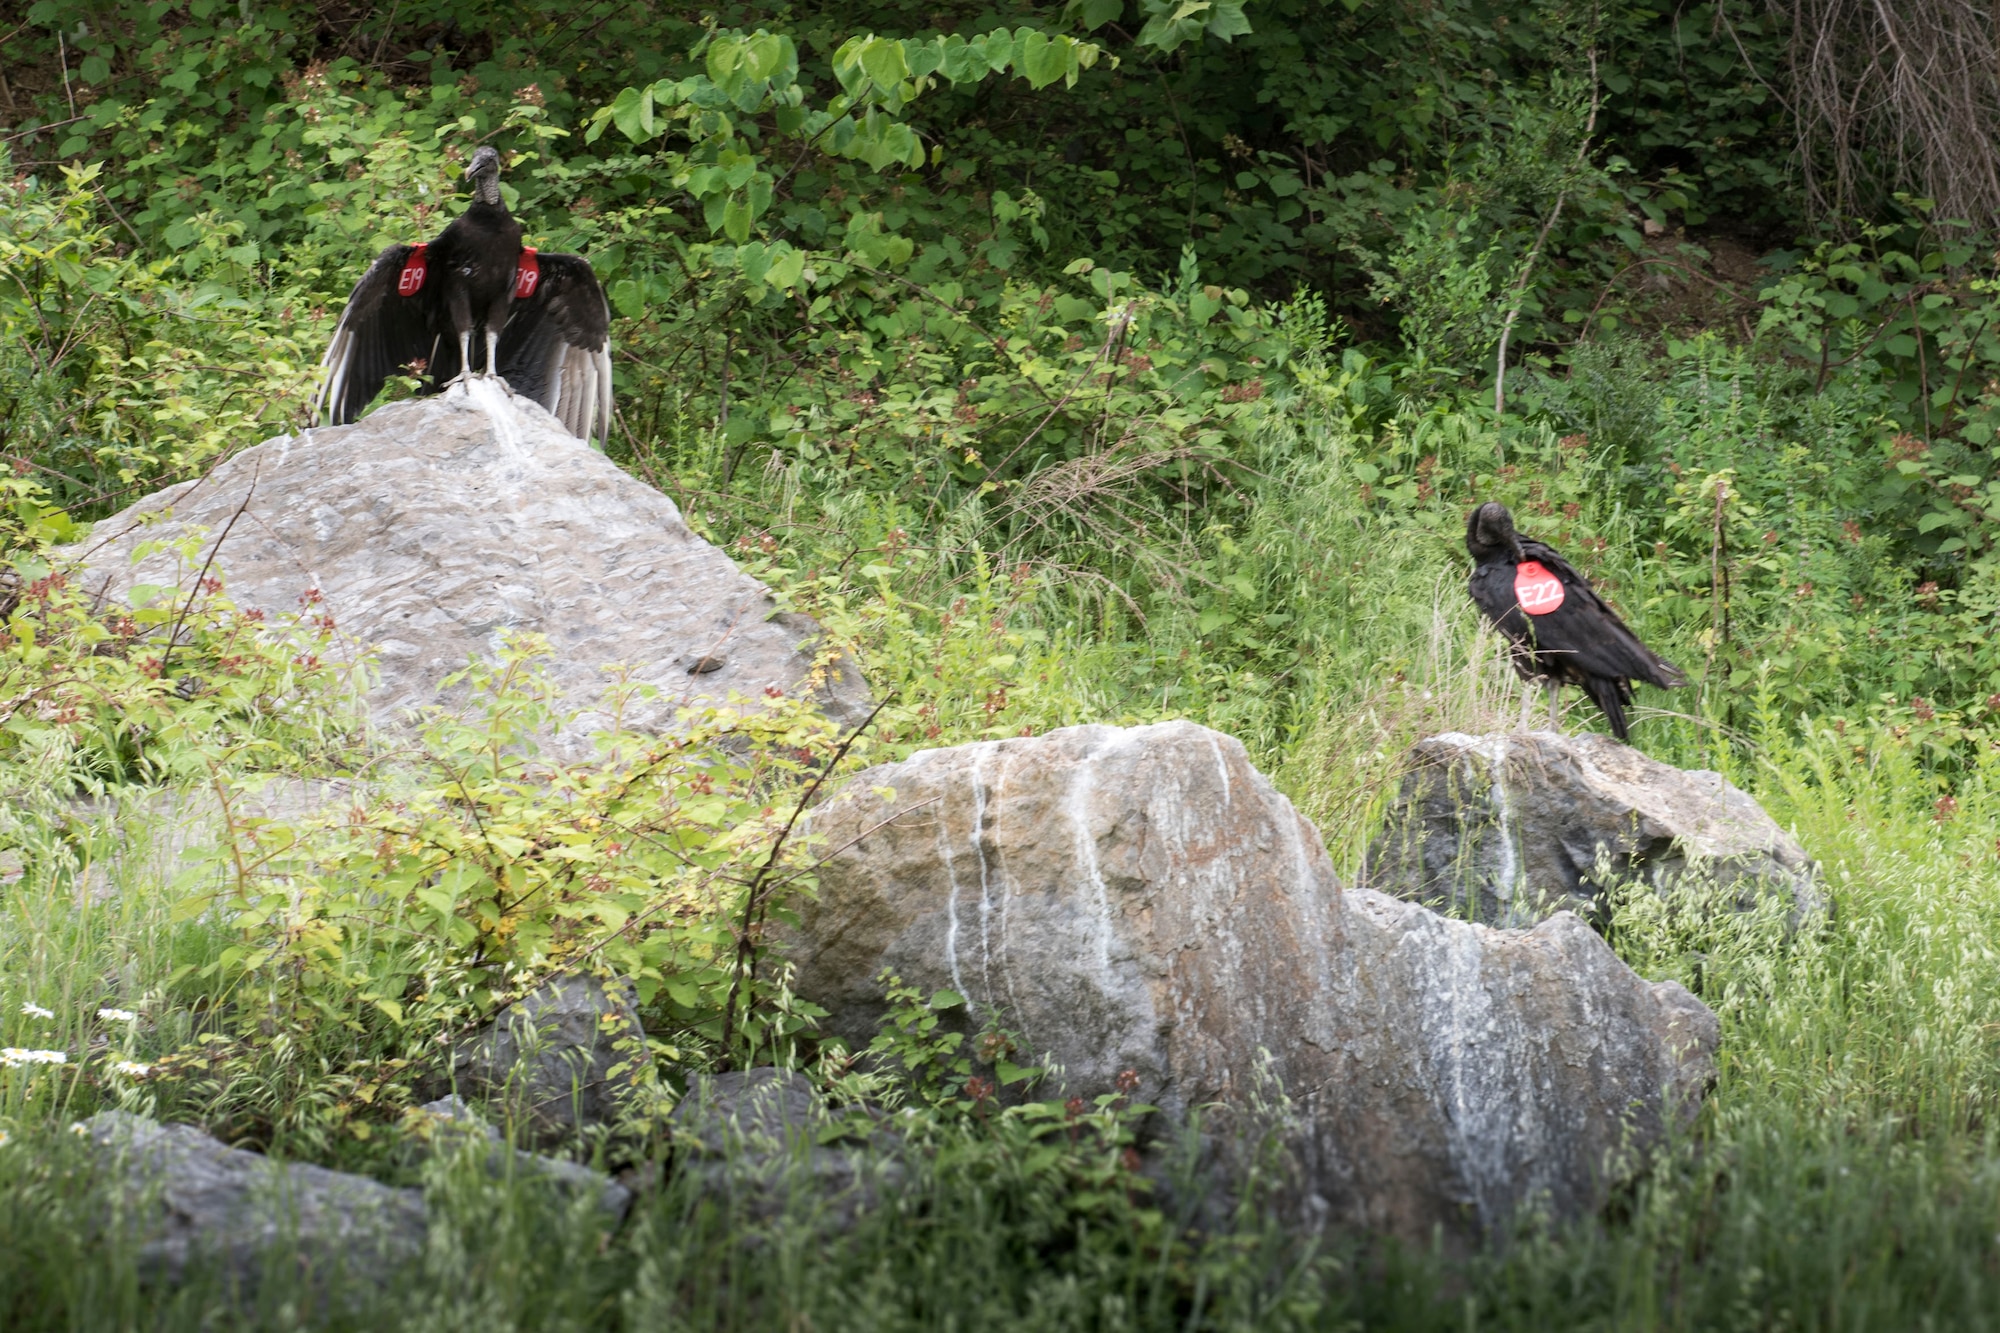 Black vultures perch on rocks after being fitted with red tags at Argos Cement Plant. The 167th Airlift Wing, Argos, USDA and Conservation Science Global, have partnered to study black vultures that have seemingly taken residence on Argos property and pose potential dangers to local air traffic. (U.S. Air National Guard photo by Senior Master Sgt. Emily Beightol-Deyerle)